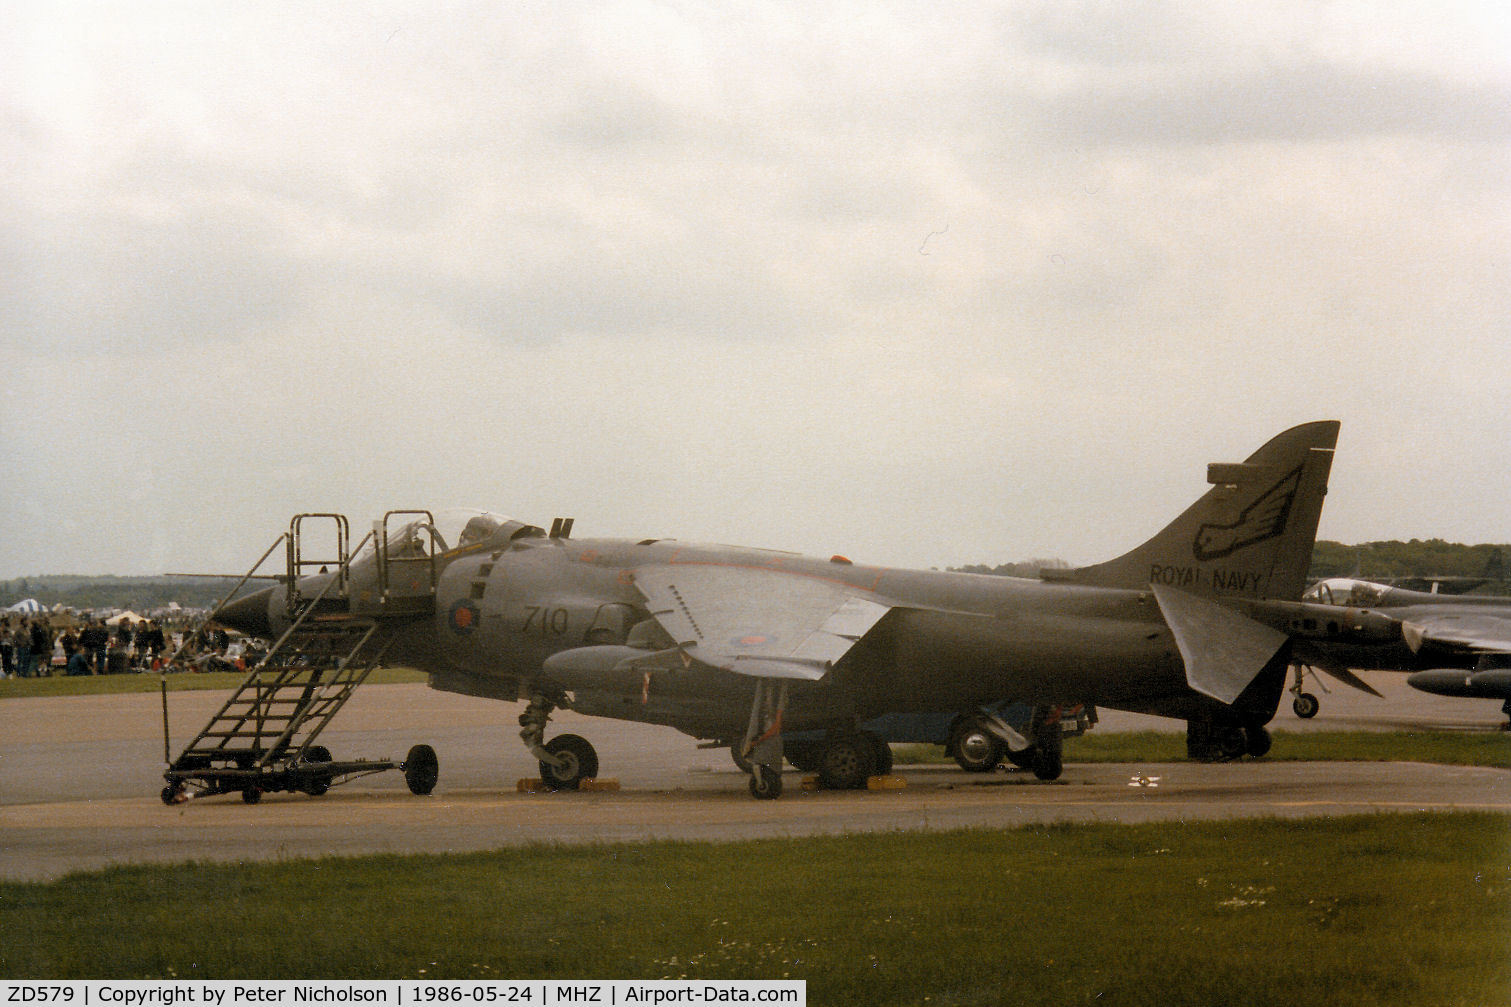 ZD579, 1985 British Aerospace Sea Harrier FRS.1 C/N 41H-912042/B36/P14, Sea Harrier FRS.1 of 899 Squadron based at RNAS Yeovilton on the flight-line at the 1986 RAF Mildenhall Air Fete.